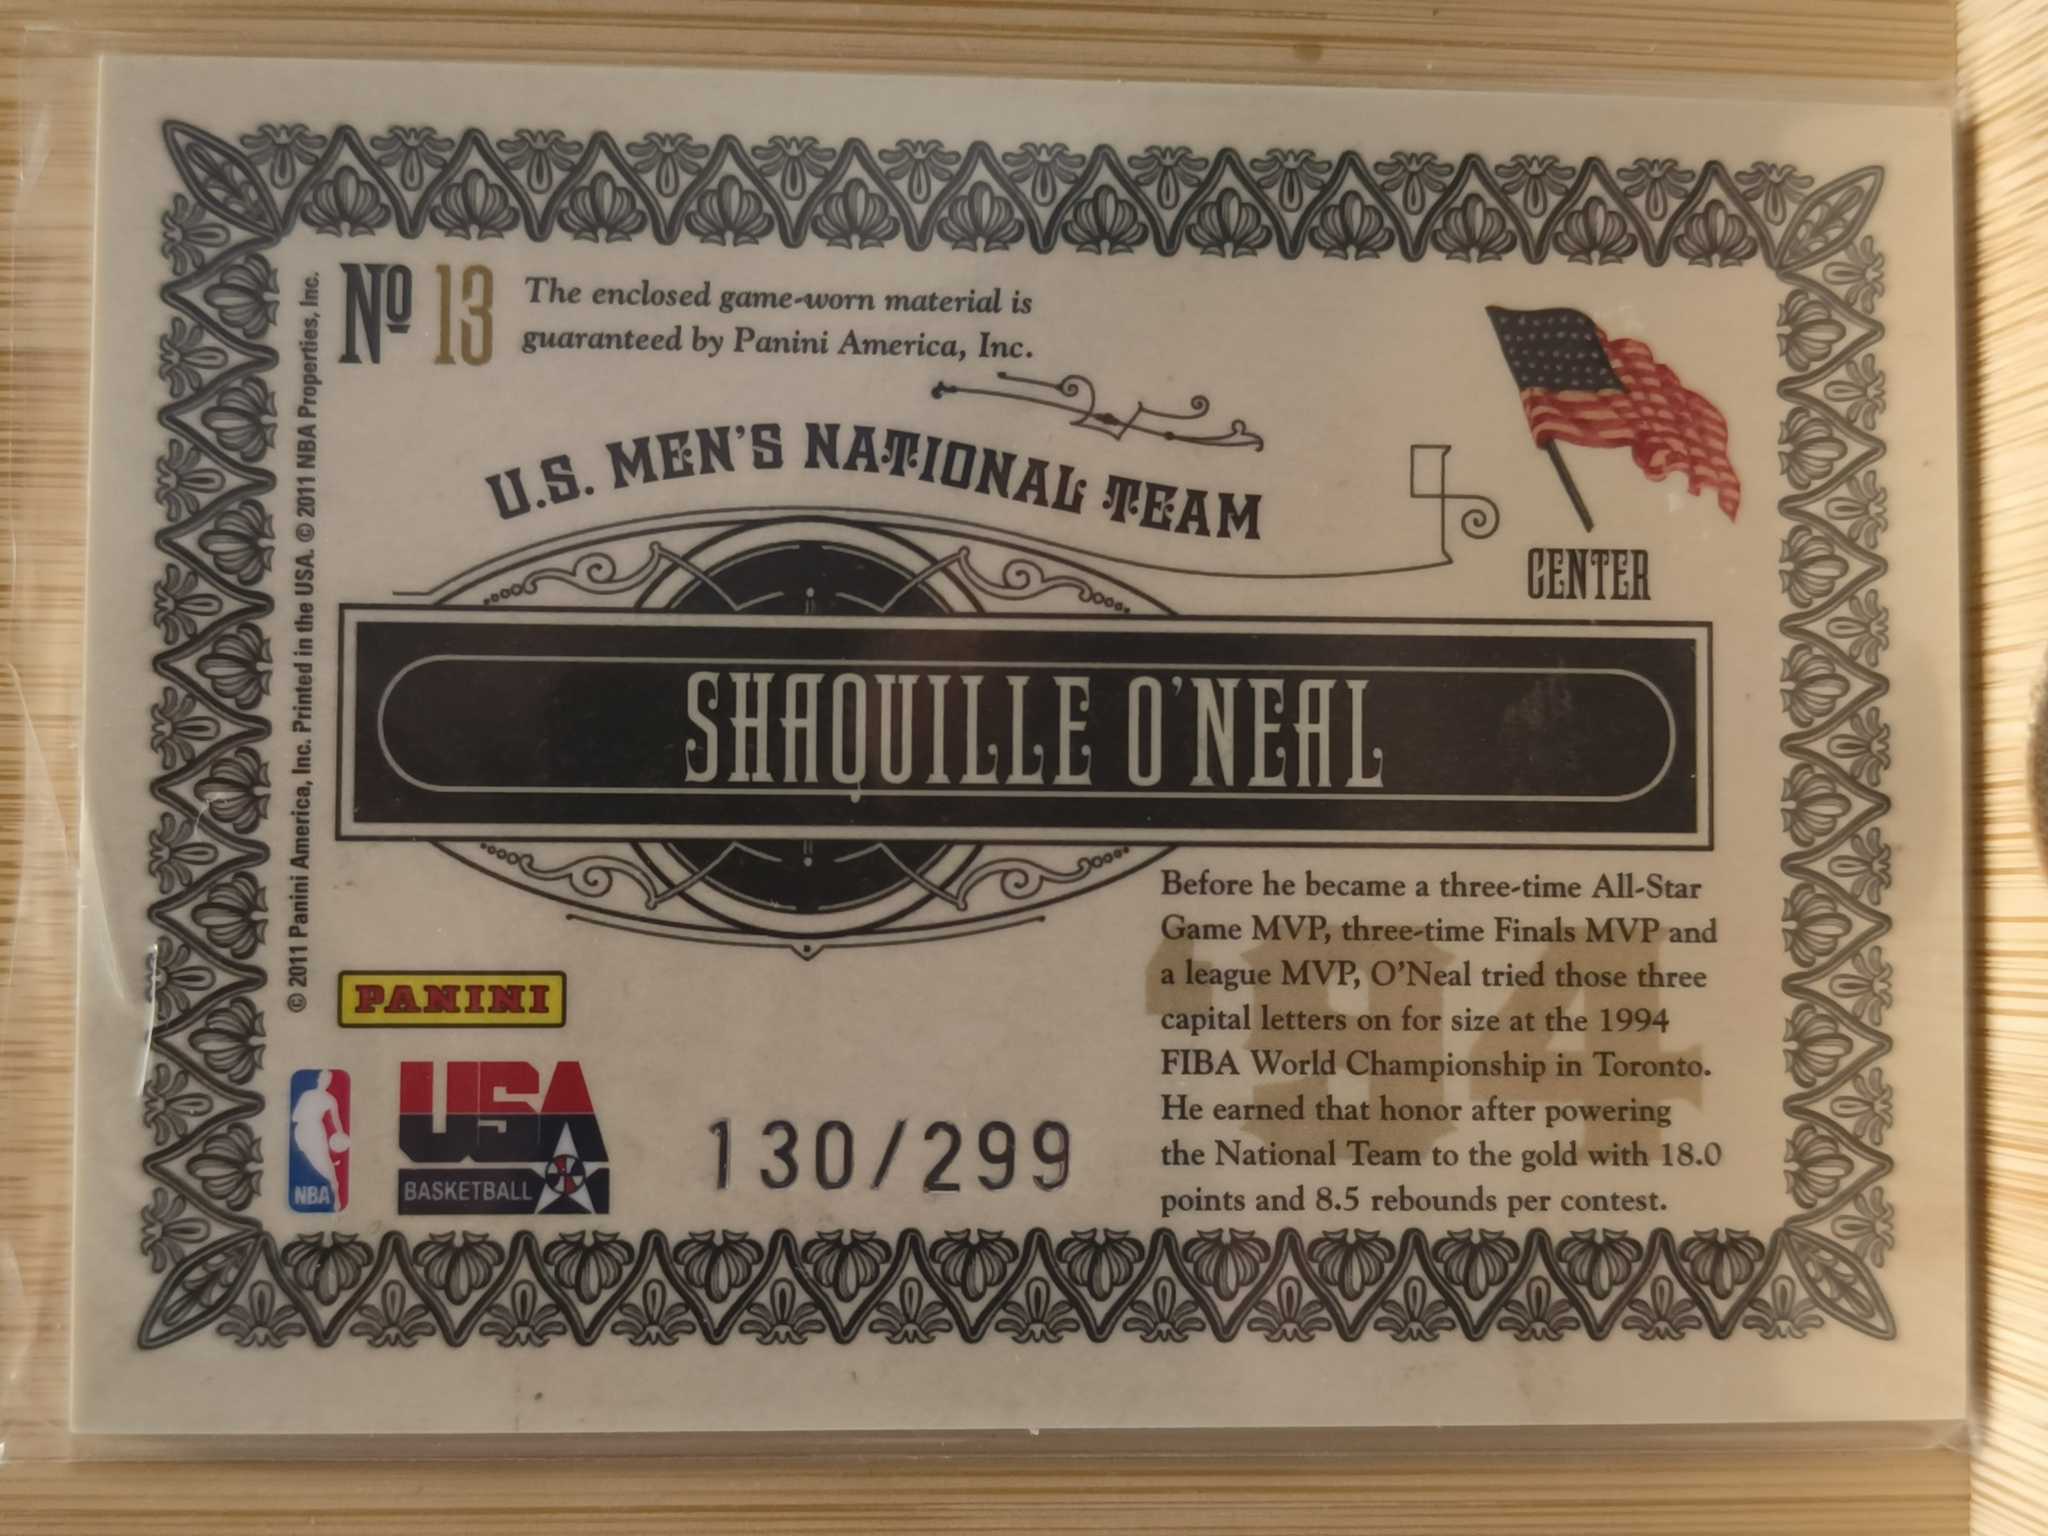 2010-11 Panini Gold Medalist Shaquille O'Neal Jersey /299 TEAM USA